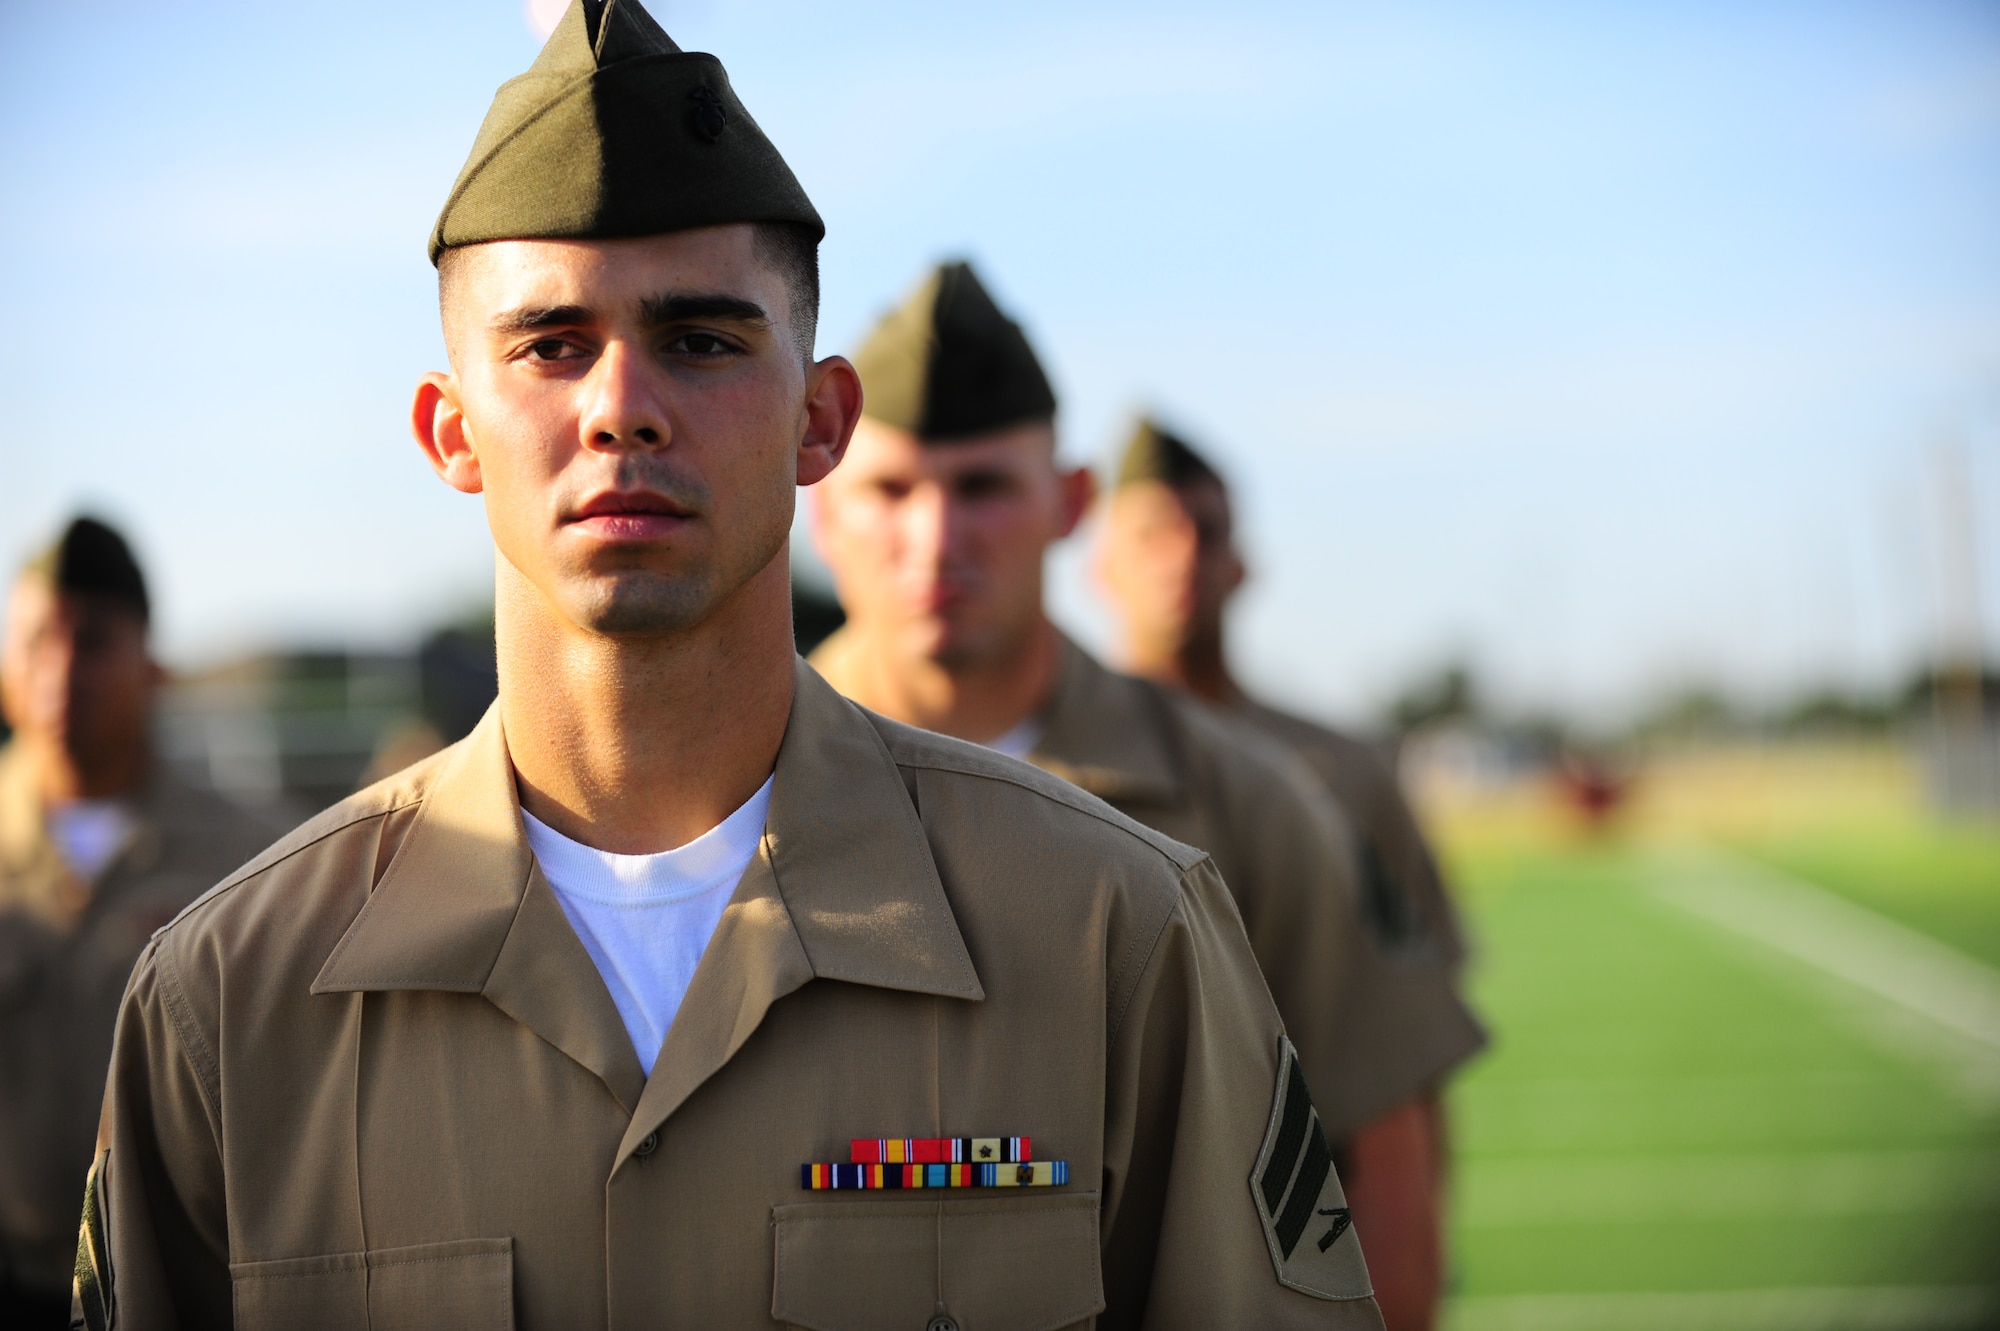 DYESS AIR FORCE BASE, Texas—Marine Cpl. Colbi Stowers, Corporal Course student, prepares to be inspected by his instructor here Aug. 5. . Twenty-eight Marine corporals stood in formation on the fitness center football field to be inspected in their uniforms by instructors. The Marine’s Enlisted Professional Military Education course, “Corporals Course”, commenced for the first time at Dyess. The 16-day course teaches young Marine noncommissioned officers (corporals) how to lead in today’s Marine Corps in garrison and in theater. (U.S. Air Force photo/ Senior Airman Domonique Washington) 